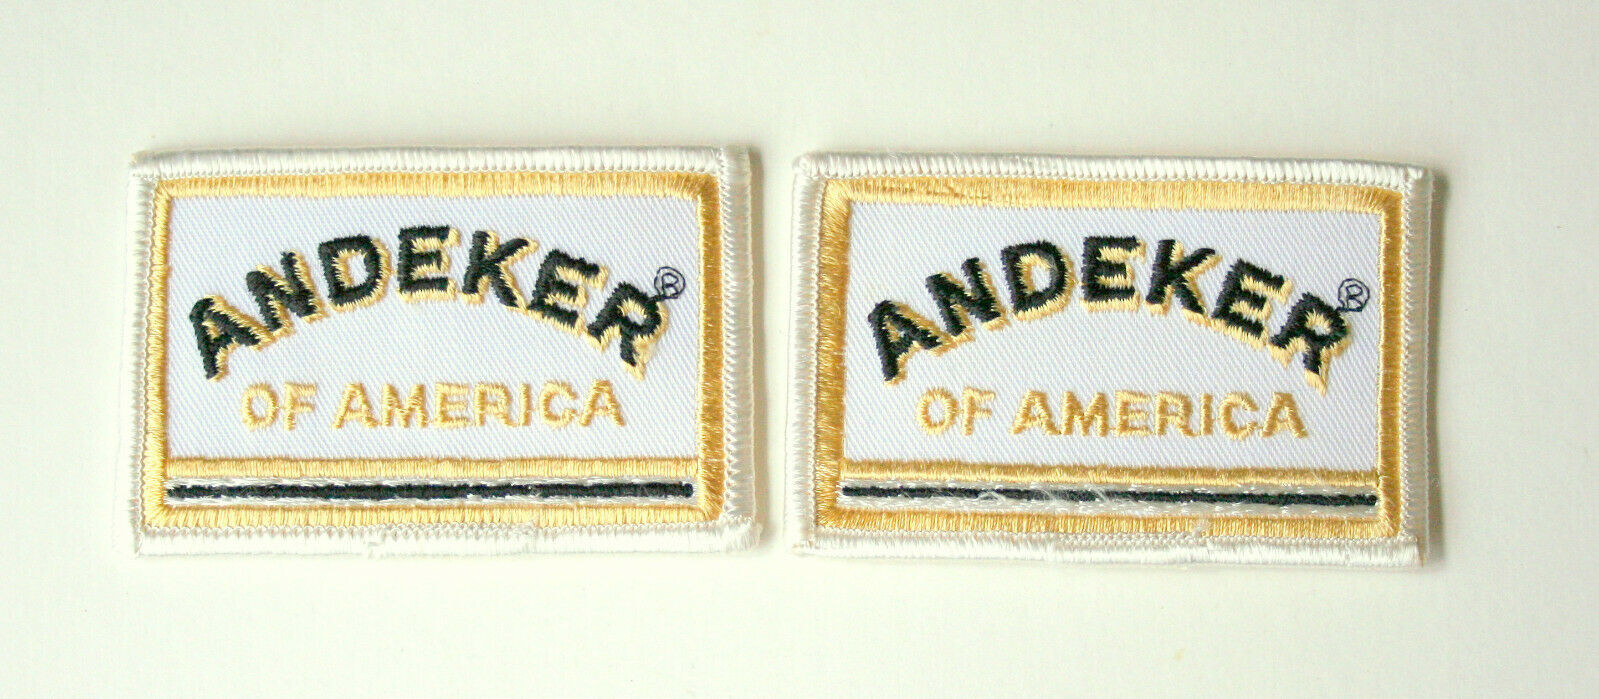 2 Andeker of America Lager Beer Cloth Patch New NOS PBR Pabst Blue Ribbon